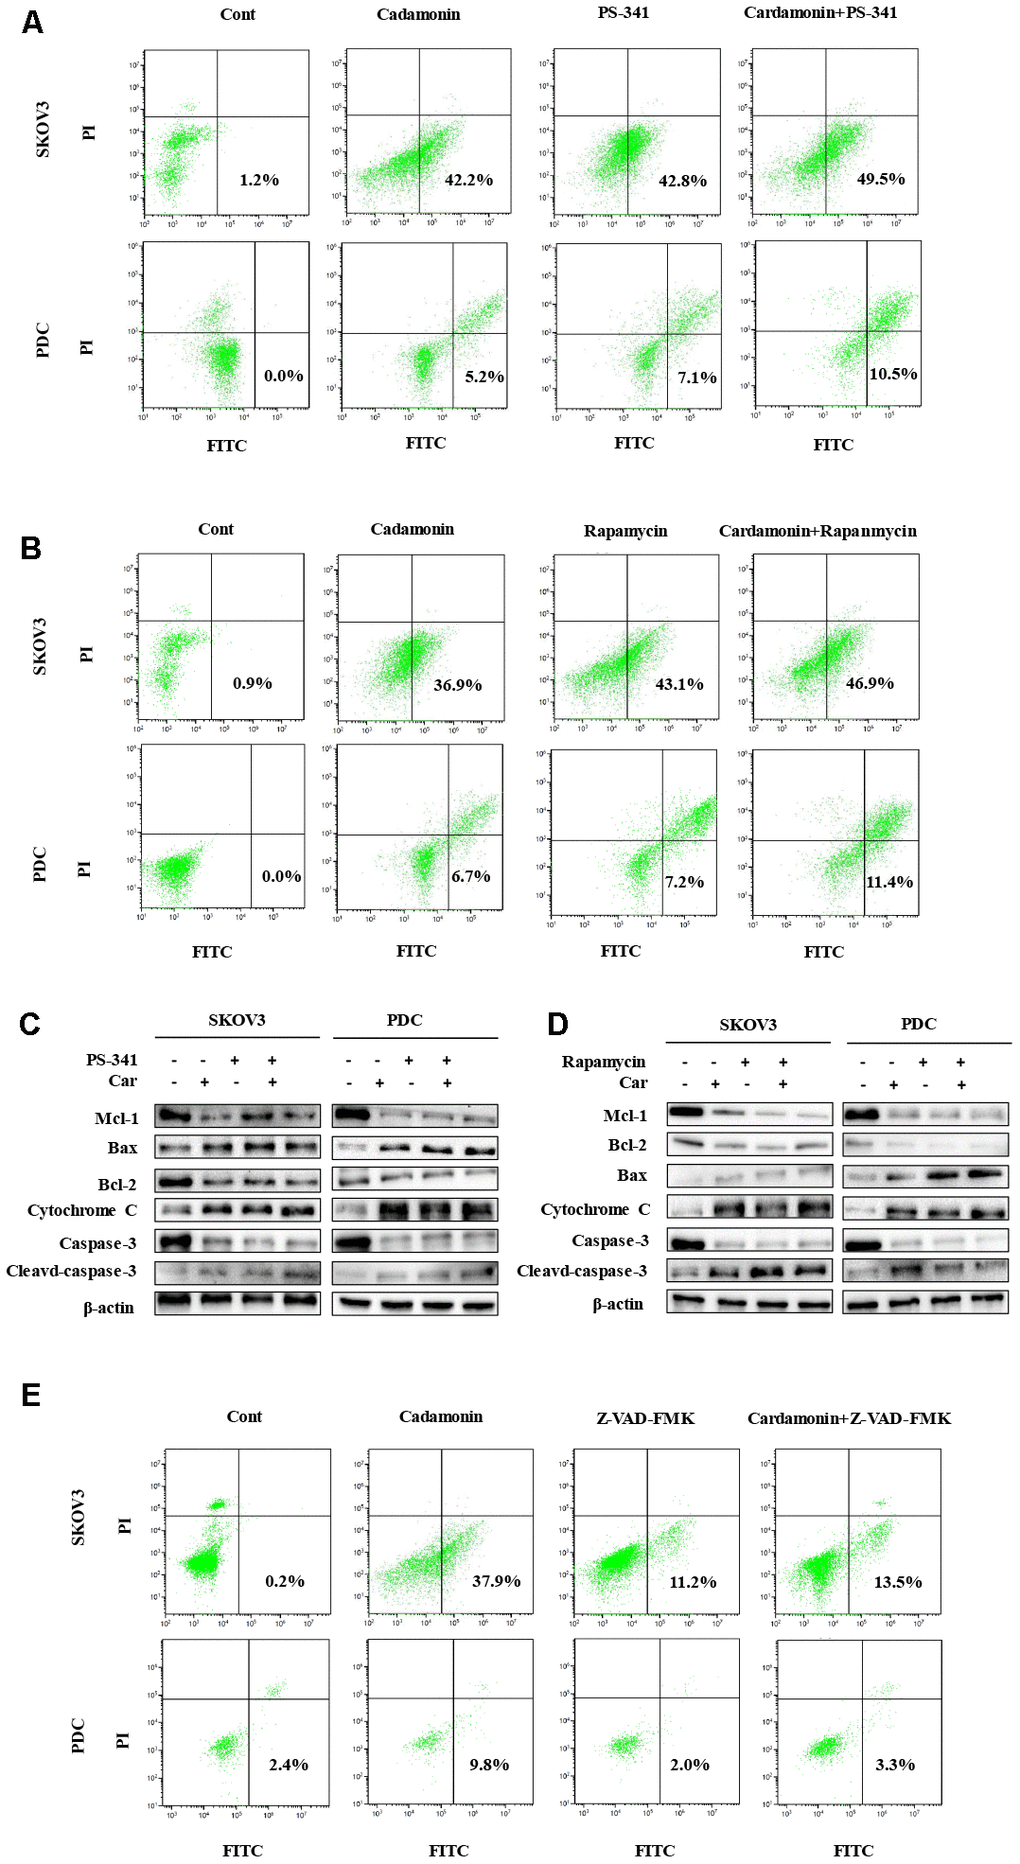 Cardamonin induces apoptosis through NF-κB and mTOR pathways in SKOV3 and PDC. (A, B, E) Representative images showing apoptosis detected with Annexin V-FITC and PI staining in SKOV3 and PDC after treatment of cardamonin (15 μM), PS-341 (50 nM) or Z-VAD-FMK(20 μM). The percentages in the bottom right quadrant and top right quadrant represent early and late apoptosis, respectively. (C, D) Western blot showing change of protein expression of Mcl-1, Bax, Bcl-2, cytochrome C, caspase-3 and cleaved caspase-3. β-actin was included as a loading control.